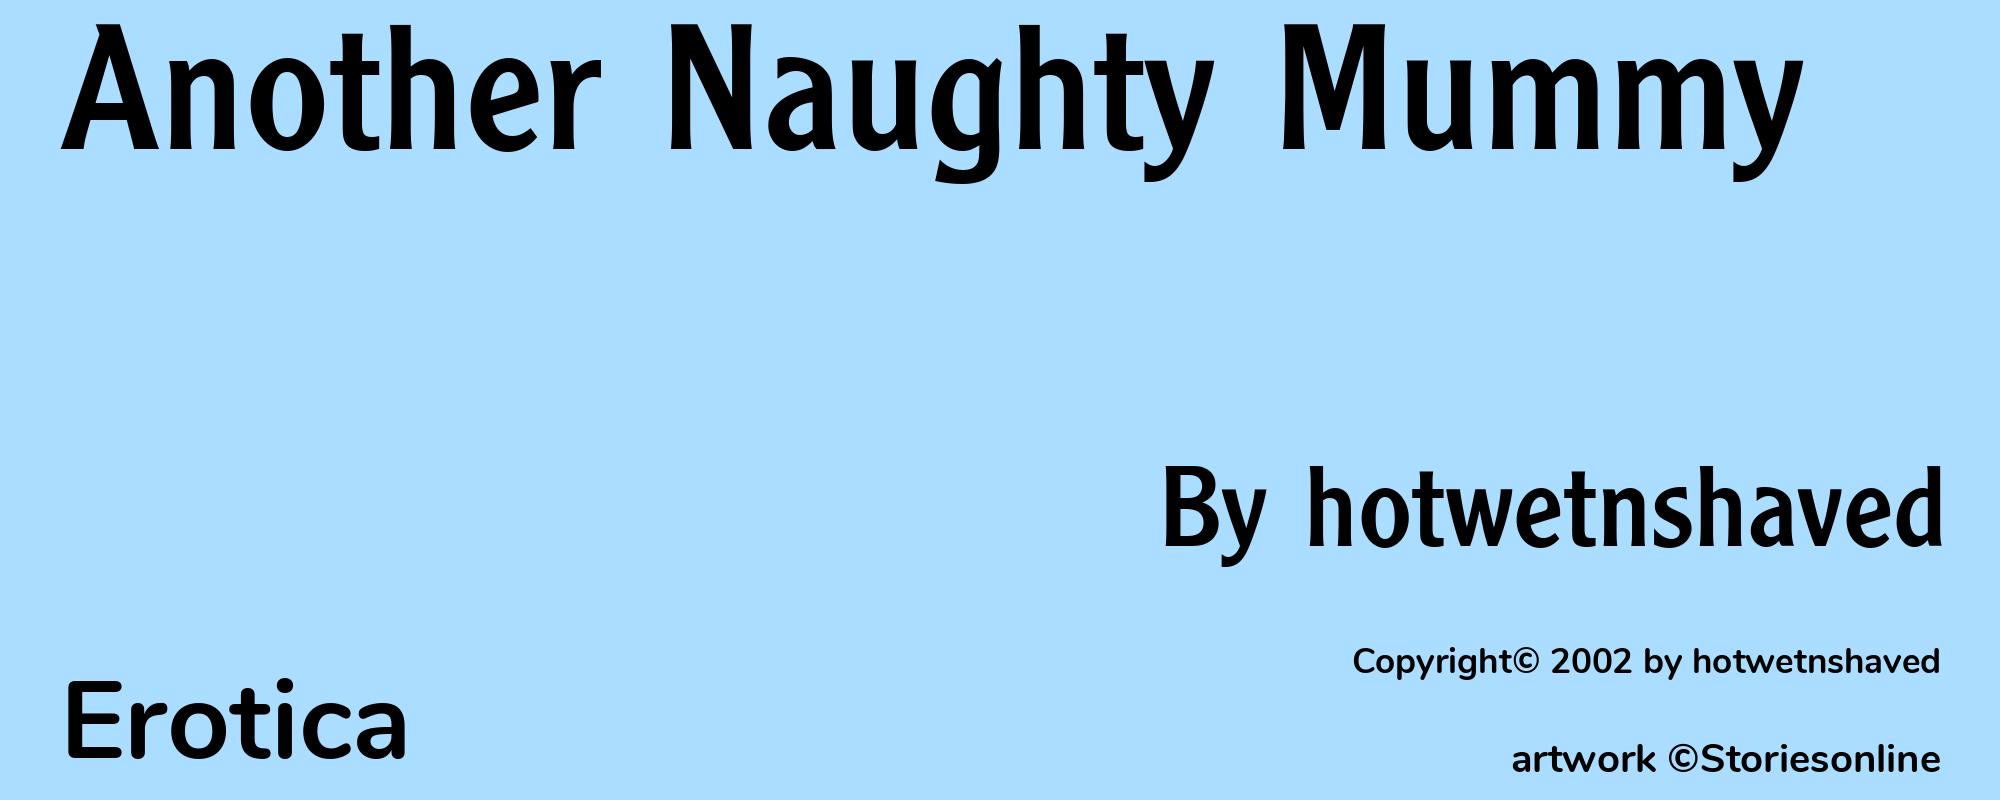 Another Naughty Mummy - Cover